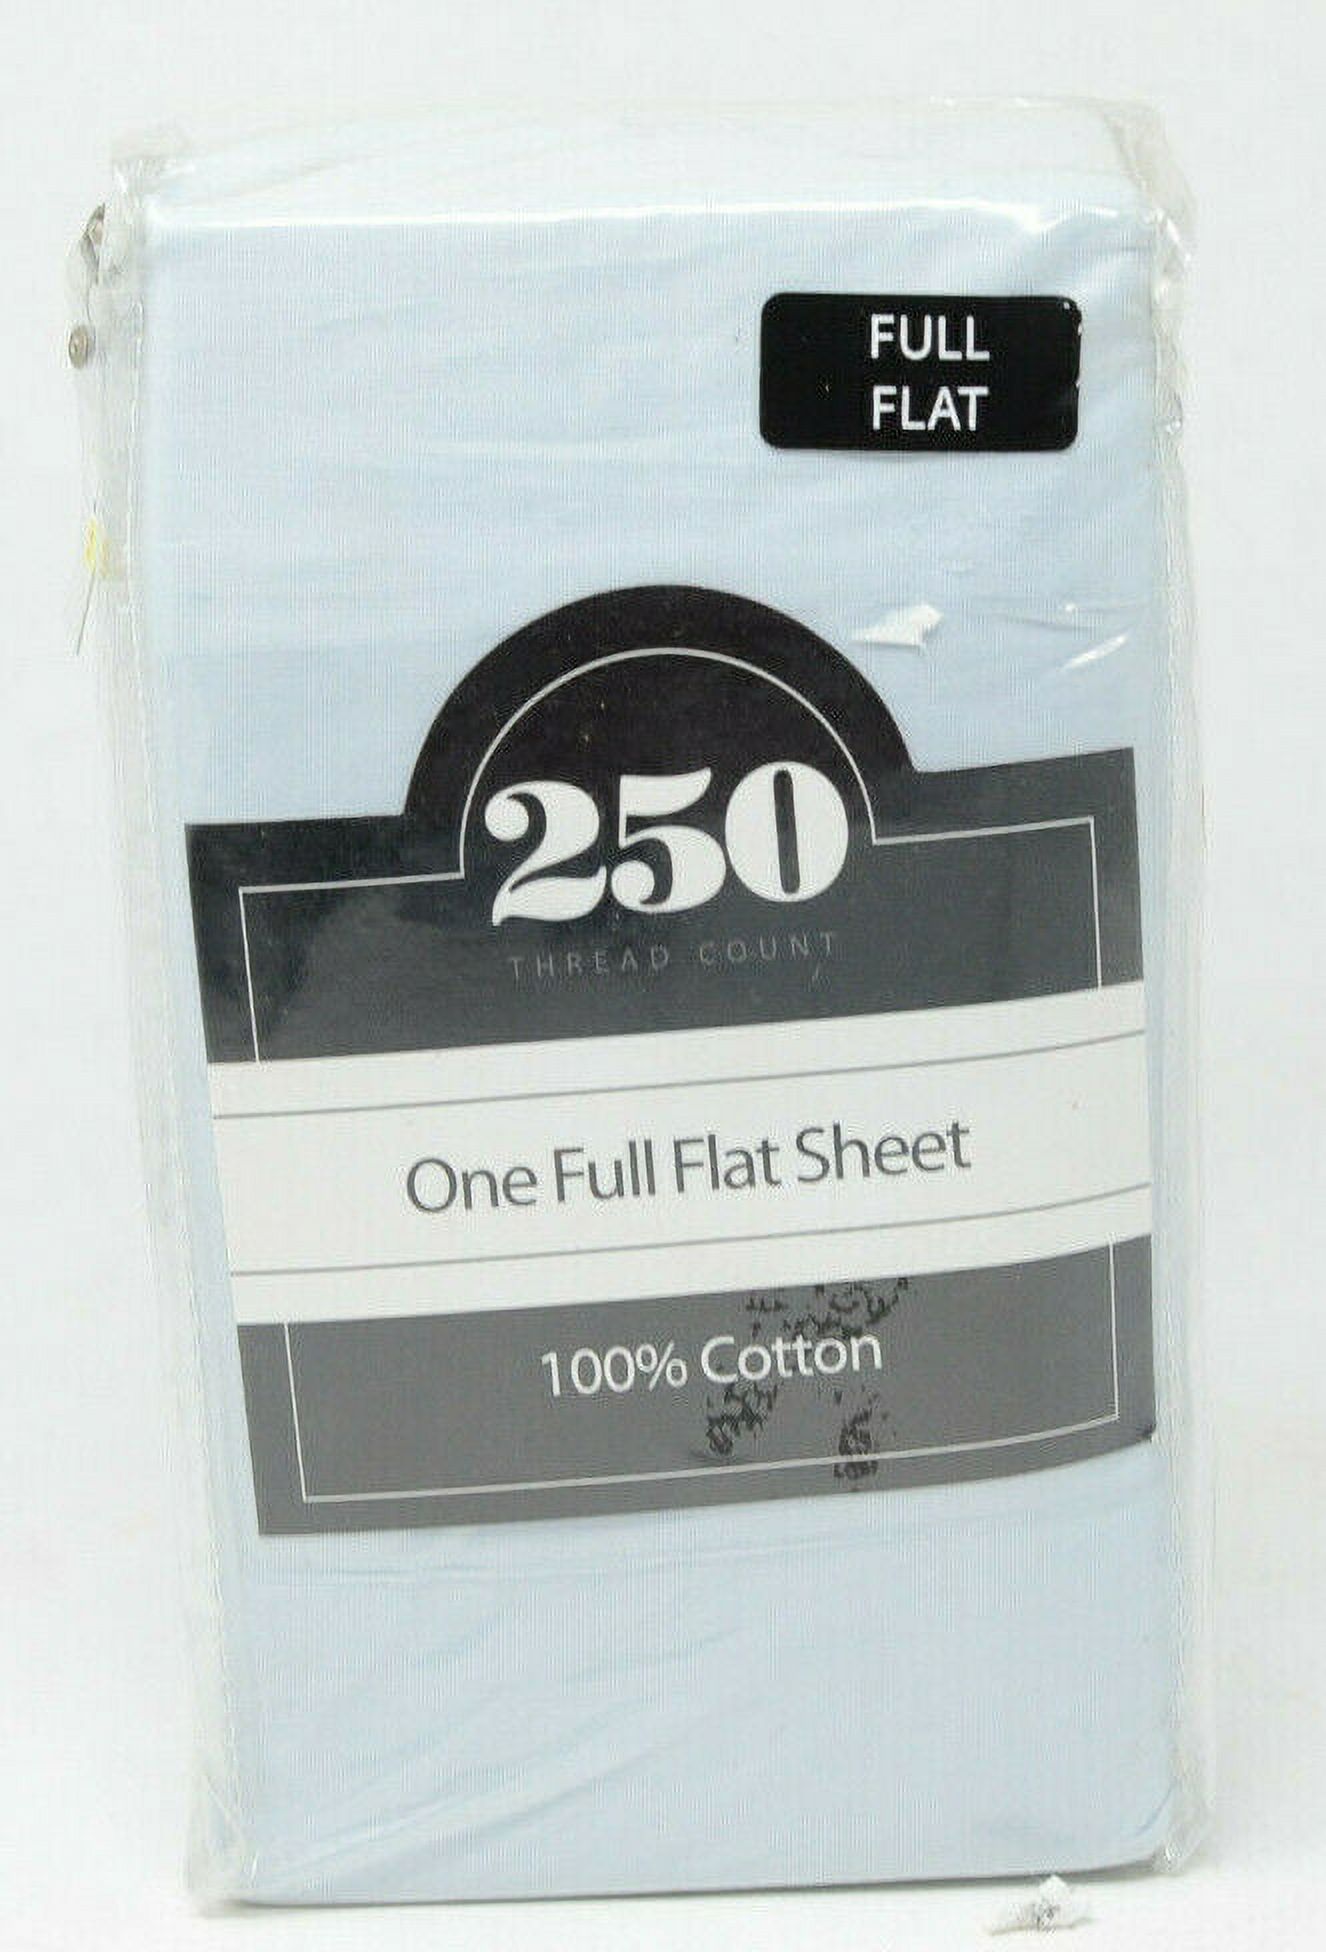 250 Thread Count Luxury FULL Flat Sheet in BLUE - image 1 of 2